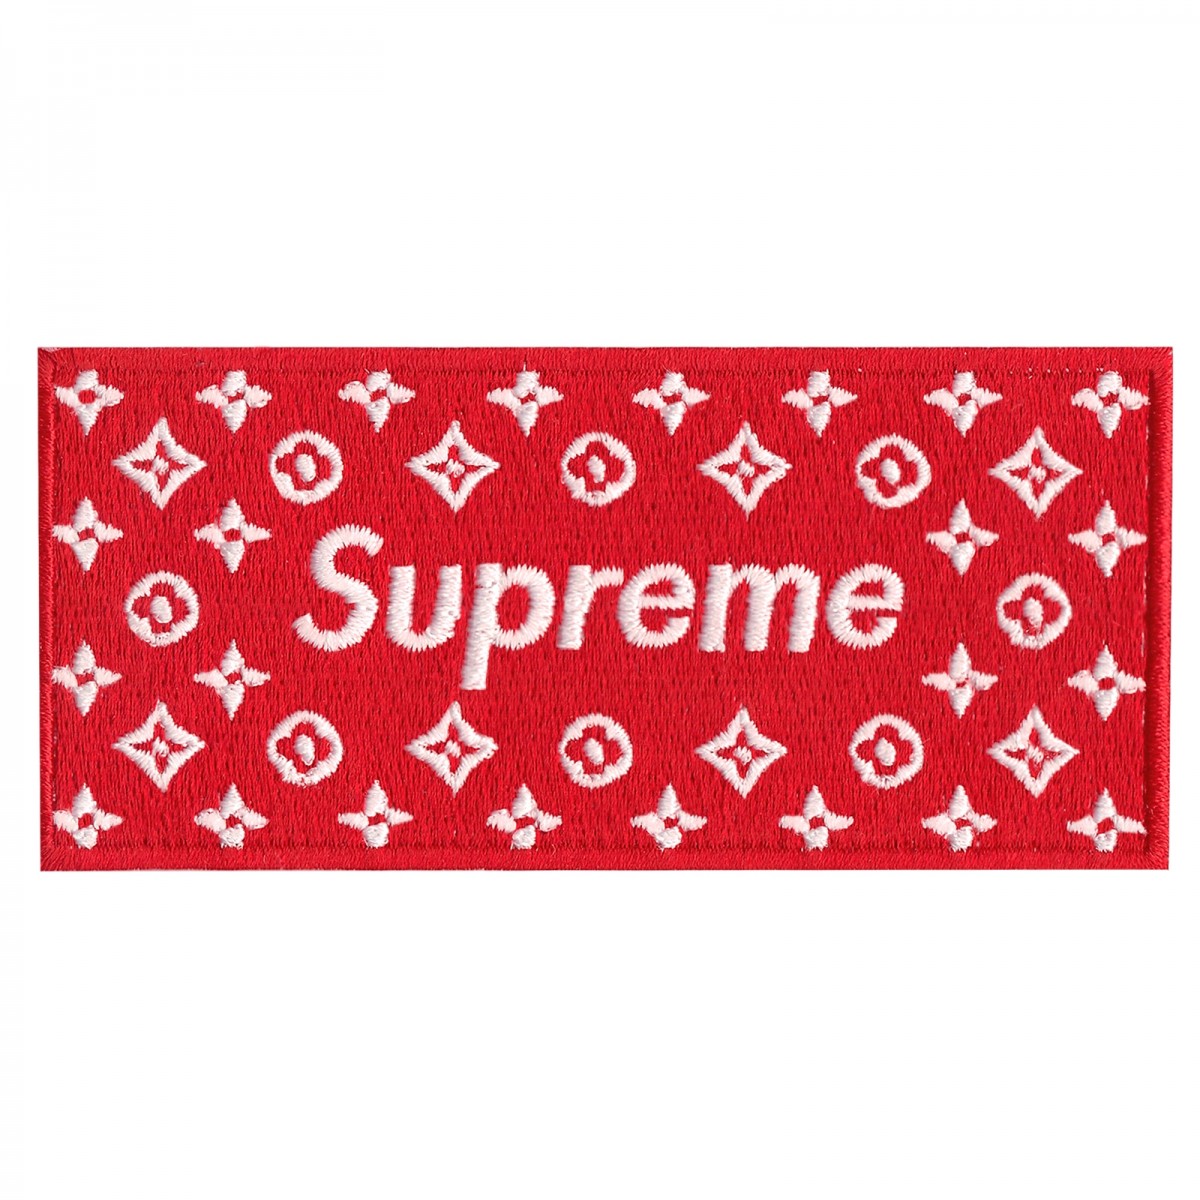 Sports Jumpman Air Wings Hypebeast Supreme Logo Iron on Patch 